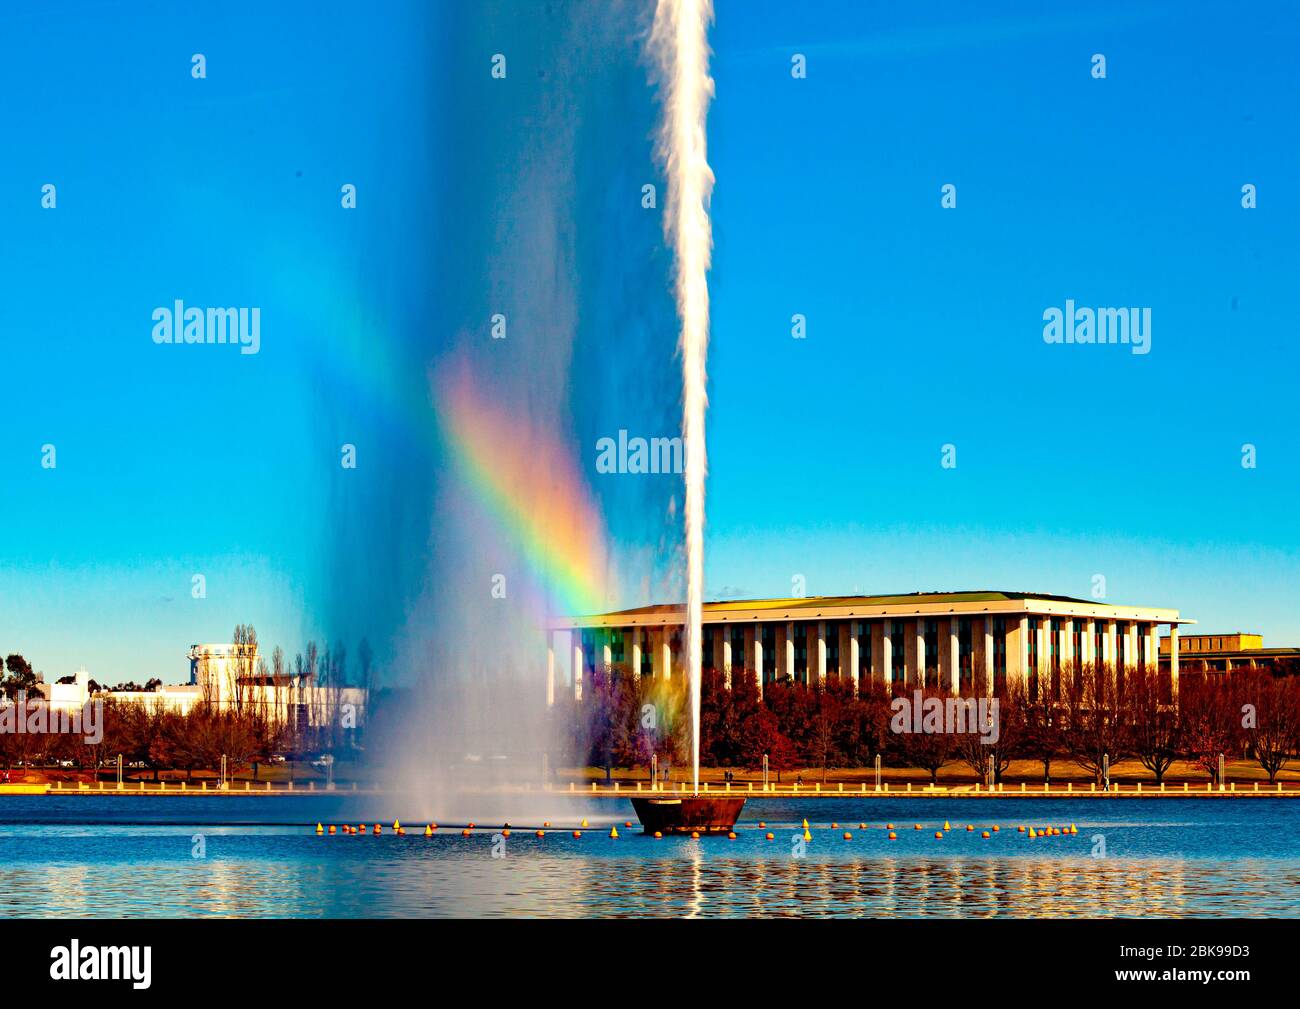 Rainbow through Captain Cook Memorial water jet on Lake Burley Griffin in Canberra, Australia's national capital, with National Library in background Stock Photo